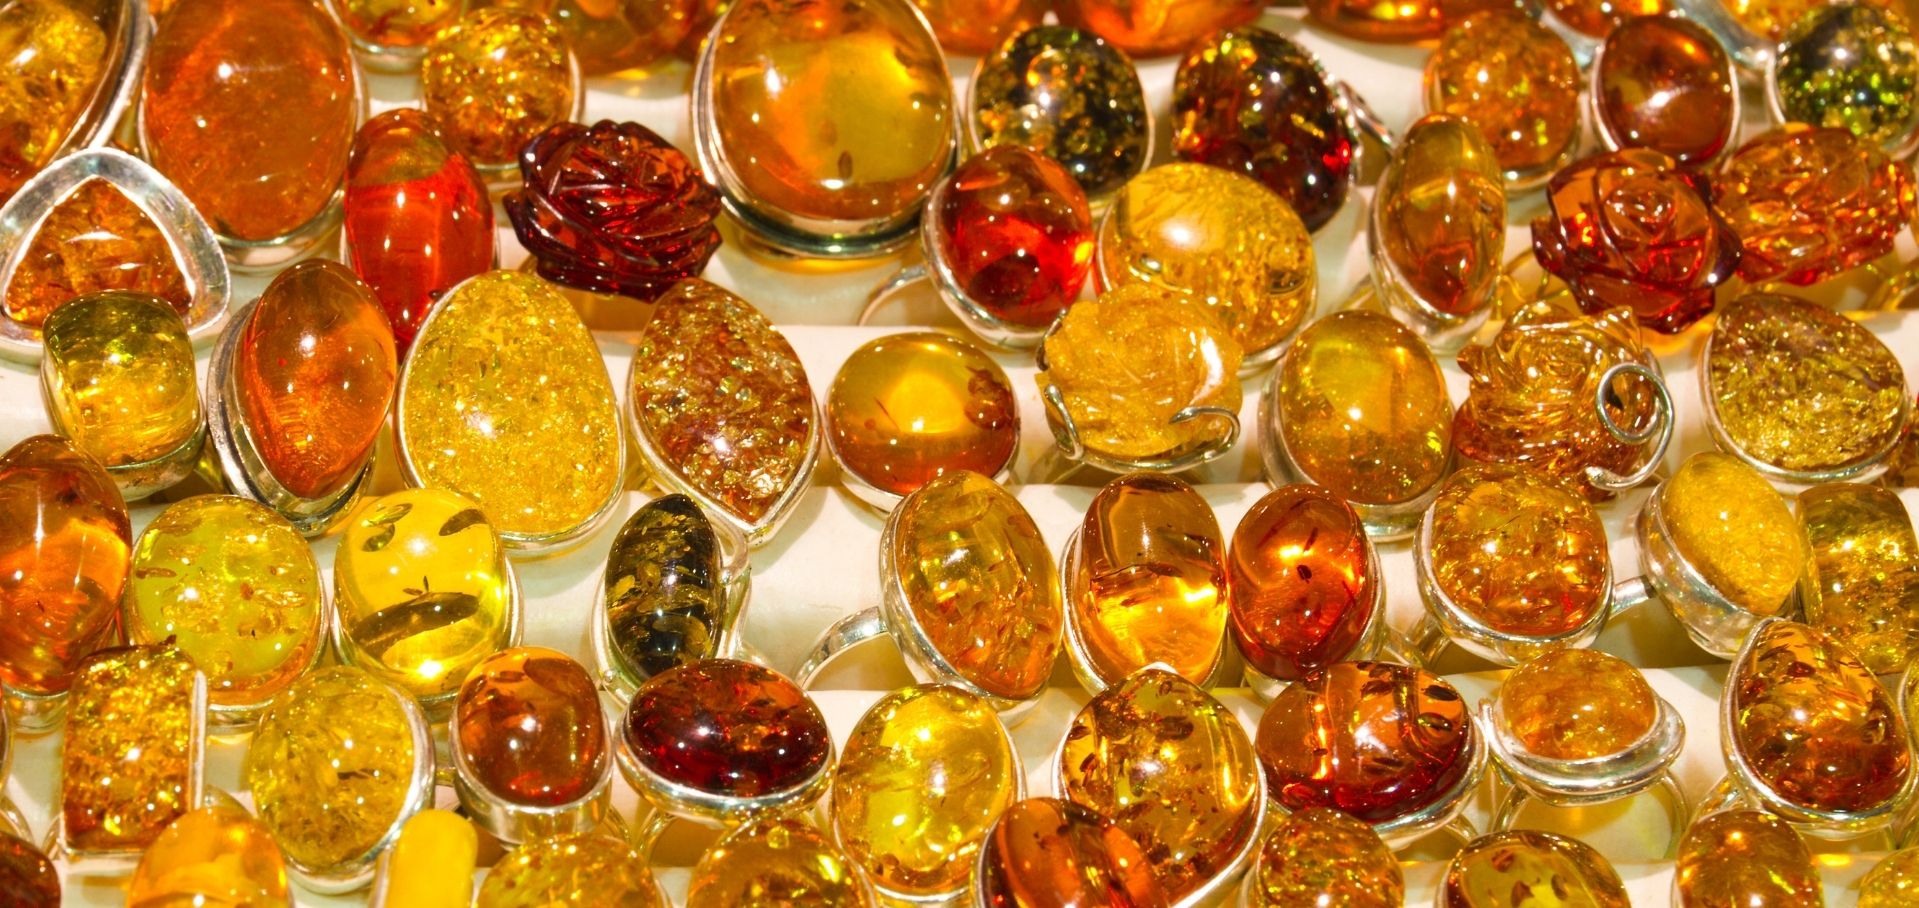 Discovering the Magic of Amber: An Introduction to the Amber Gemstone